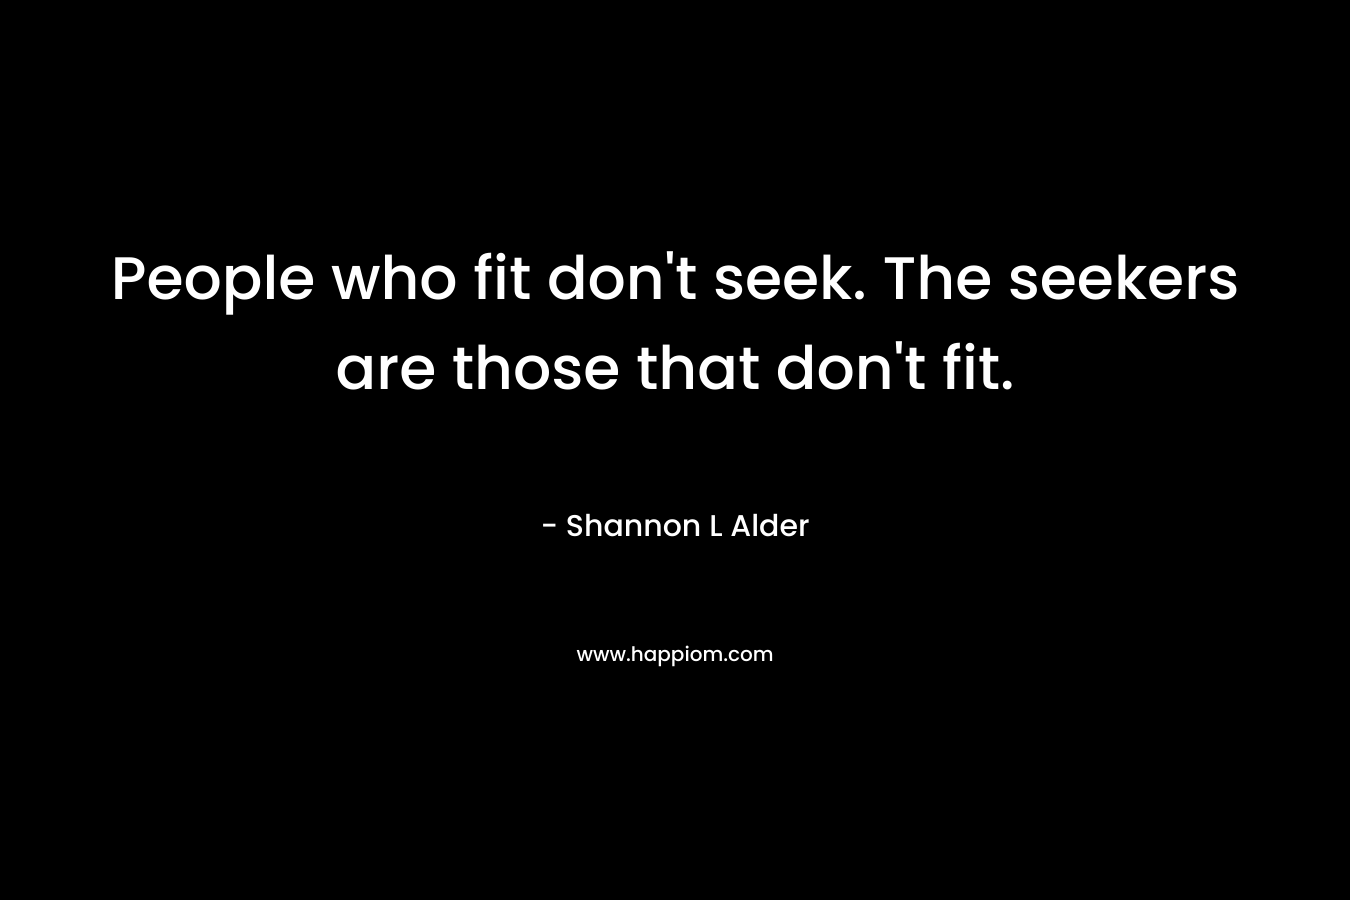 People who fit don't seek. The seekers are those that don't fit.